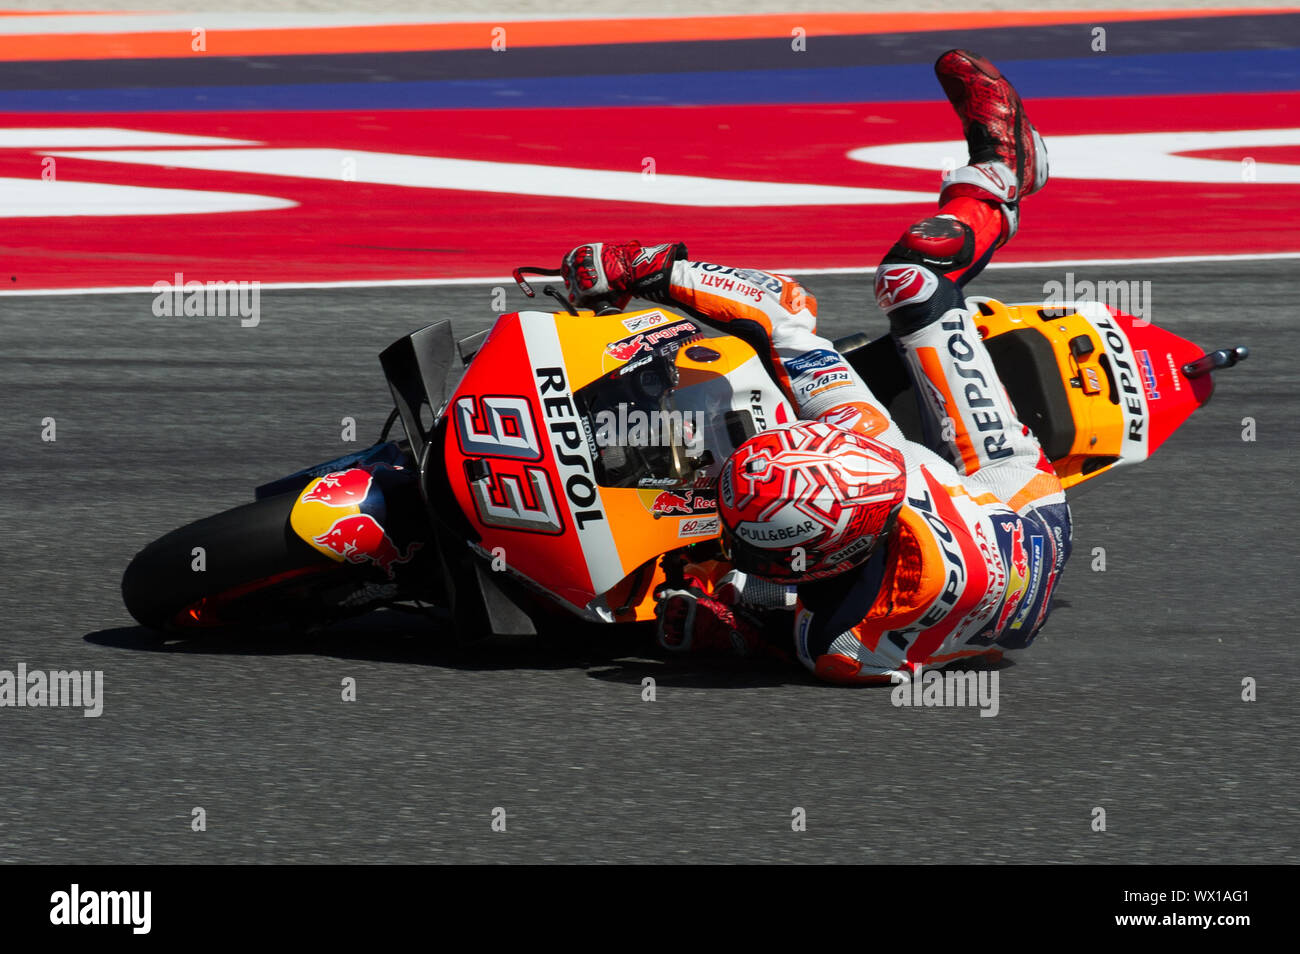 MARC MARQUEZ, SPANISH RIDER AND MOTOGP WORLD CHAMPION WITH NUMBER 93 FOR  REPSOL HONDA TEAM during Saturday Free Practice & Qualifications Of The Moto  Stock Photo - Alamy